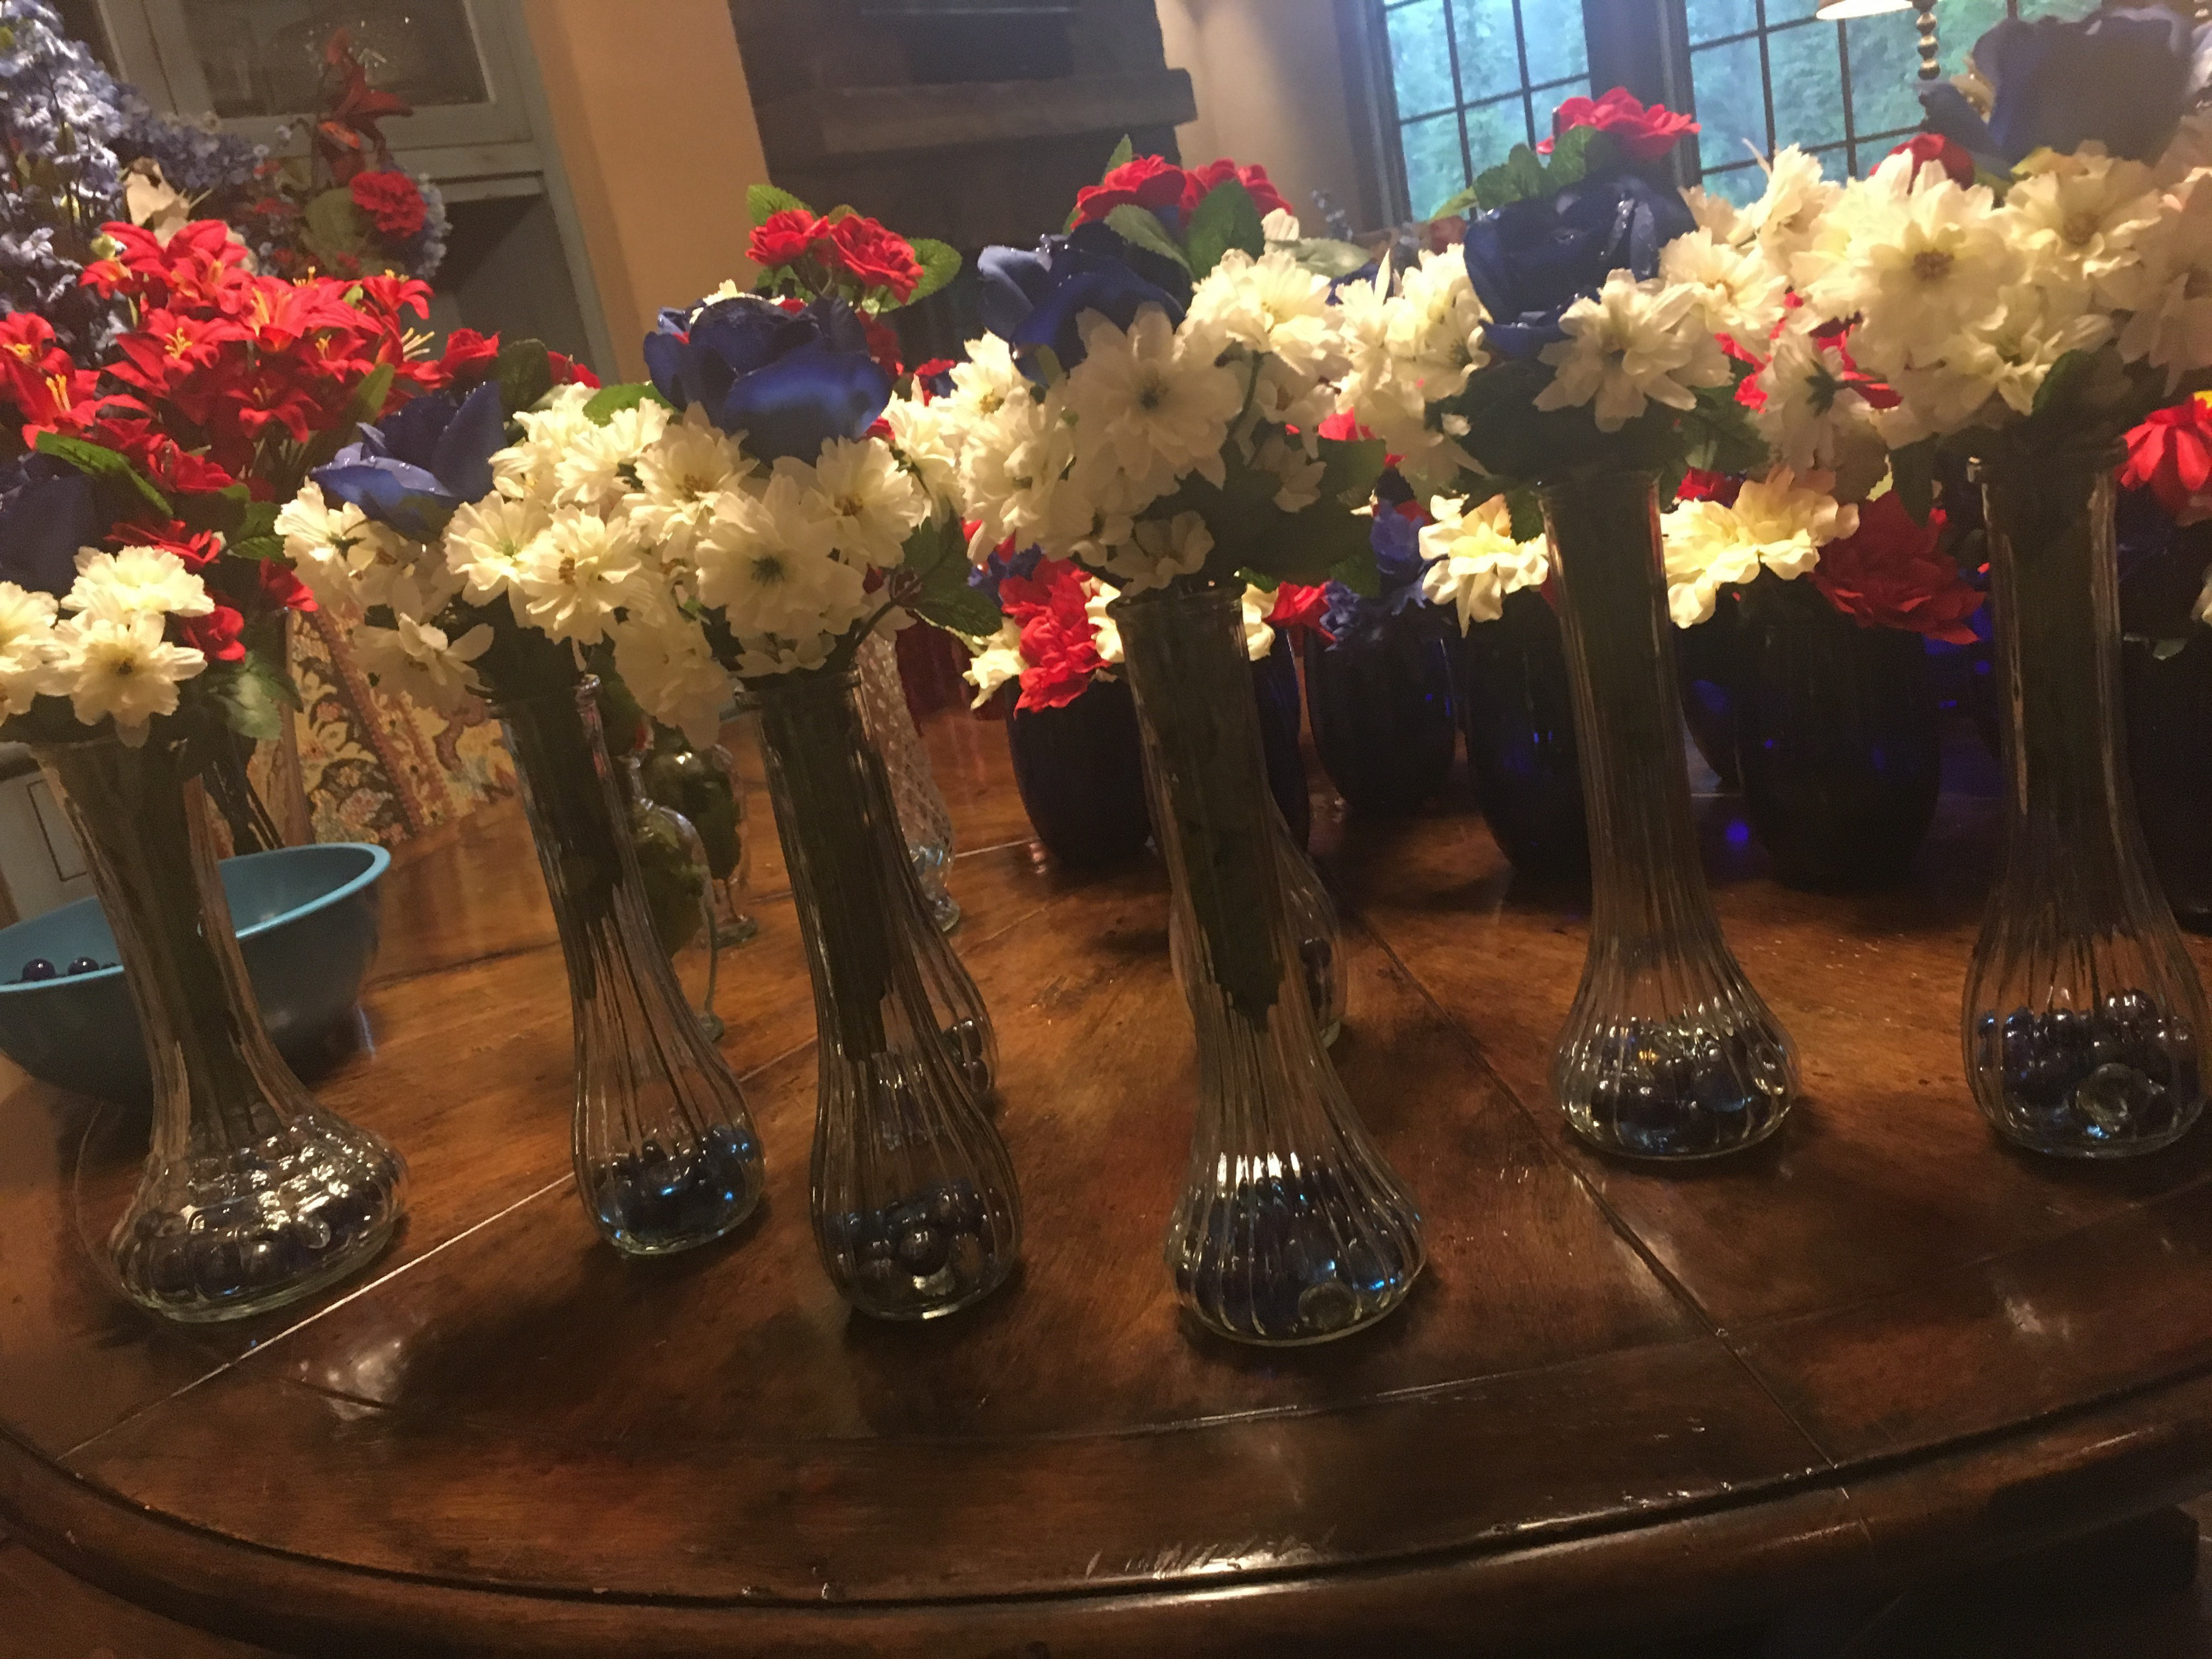 23 Lovable Tiffany Vases for Sale 2023 free download tiffany vases for sale of wedding vase for sale pics dollar tree wedding decorations awesome h with dollar tree wedding decorations awesome h vases dollar vase i 0d tiffany blue wedding deco